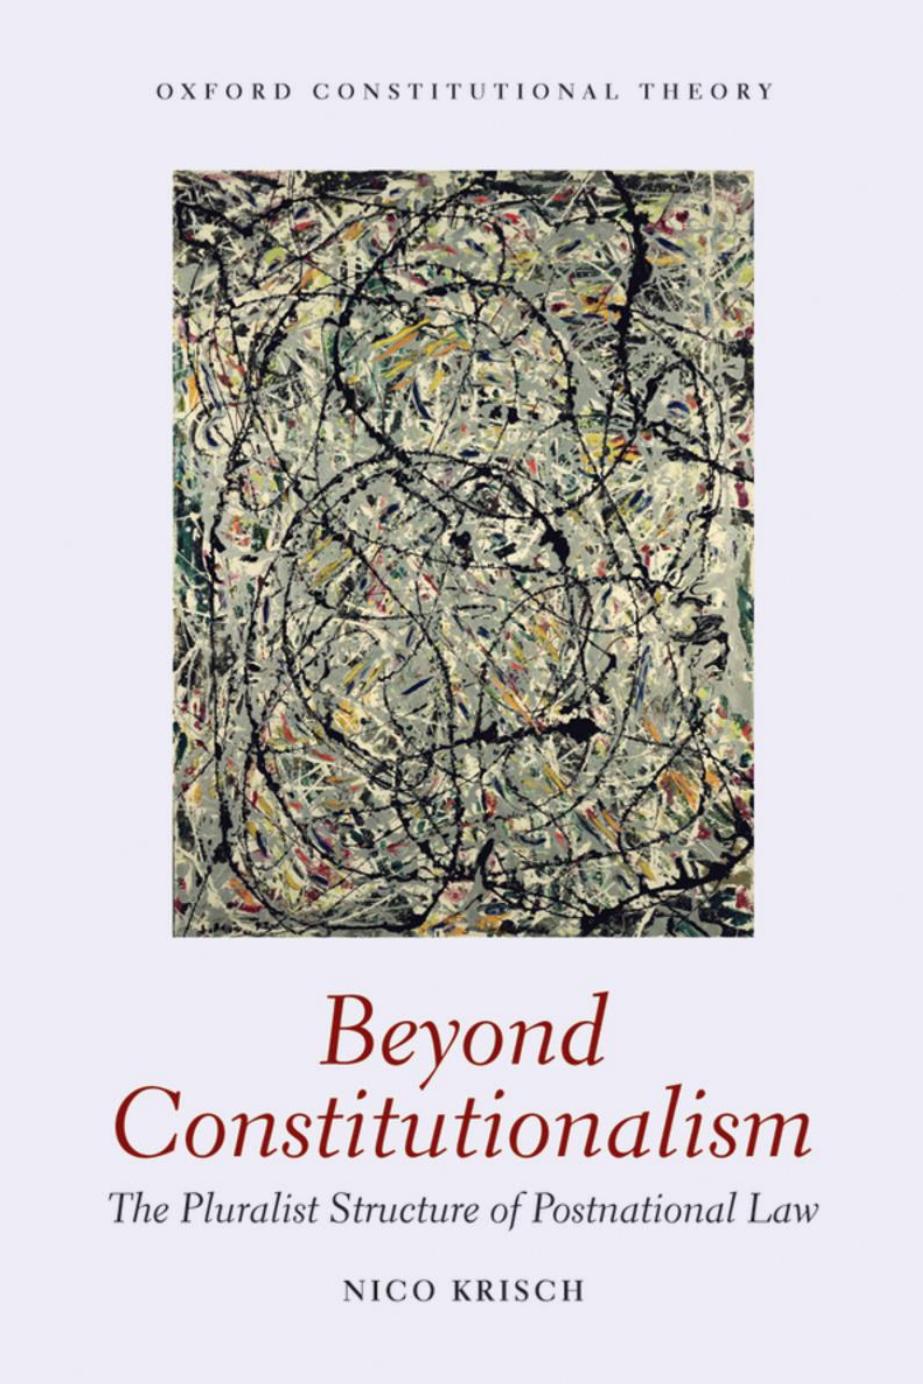 Beyond Constitutionalism: The Pluralist Structure of Postnational Law by Nico Krisch